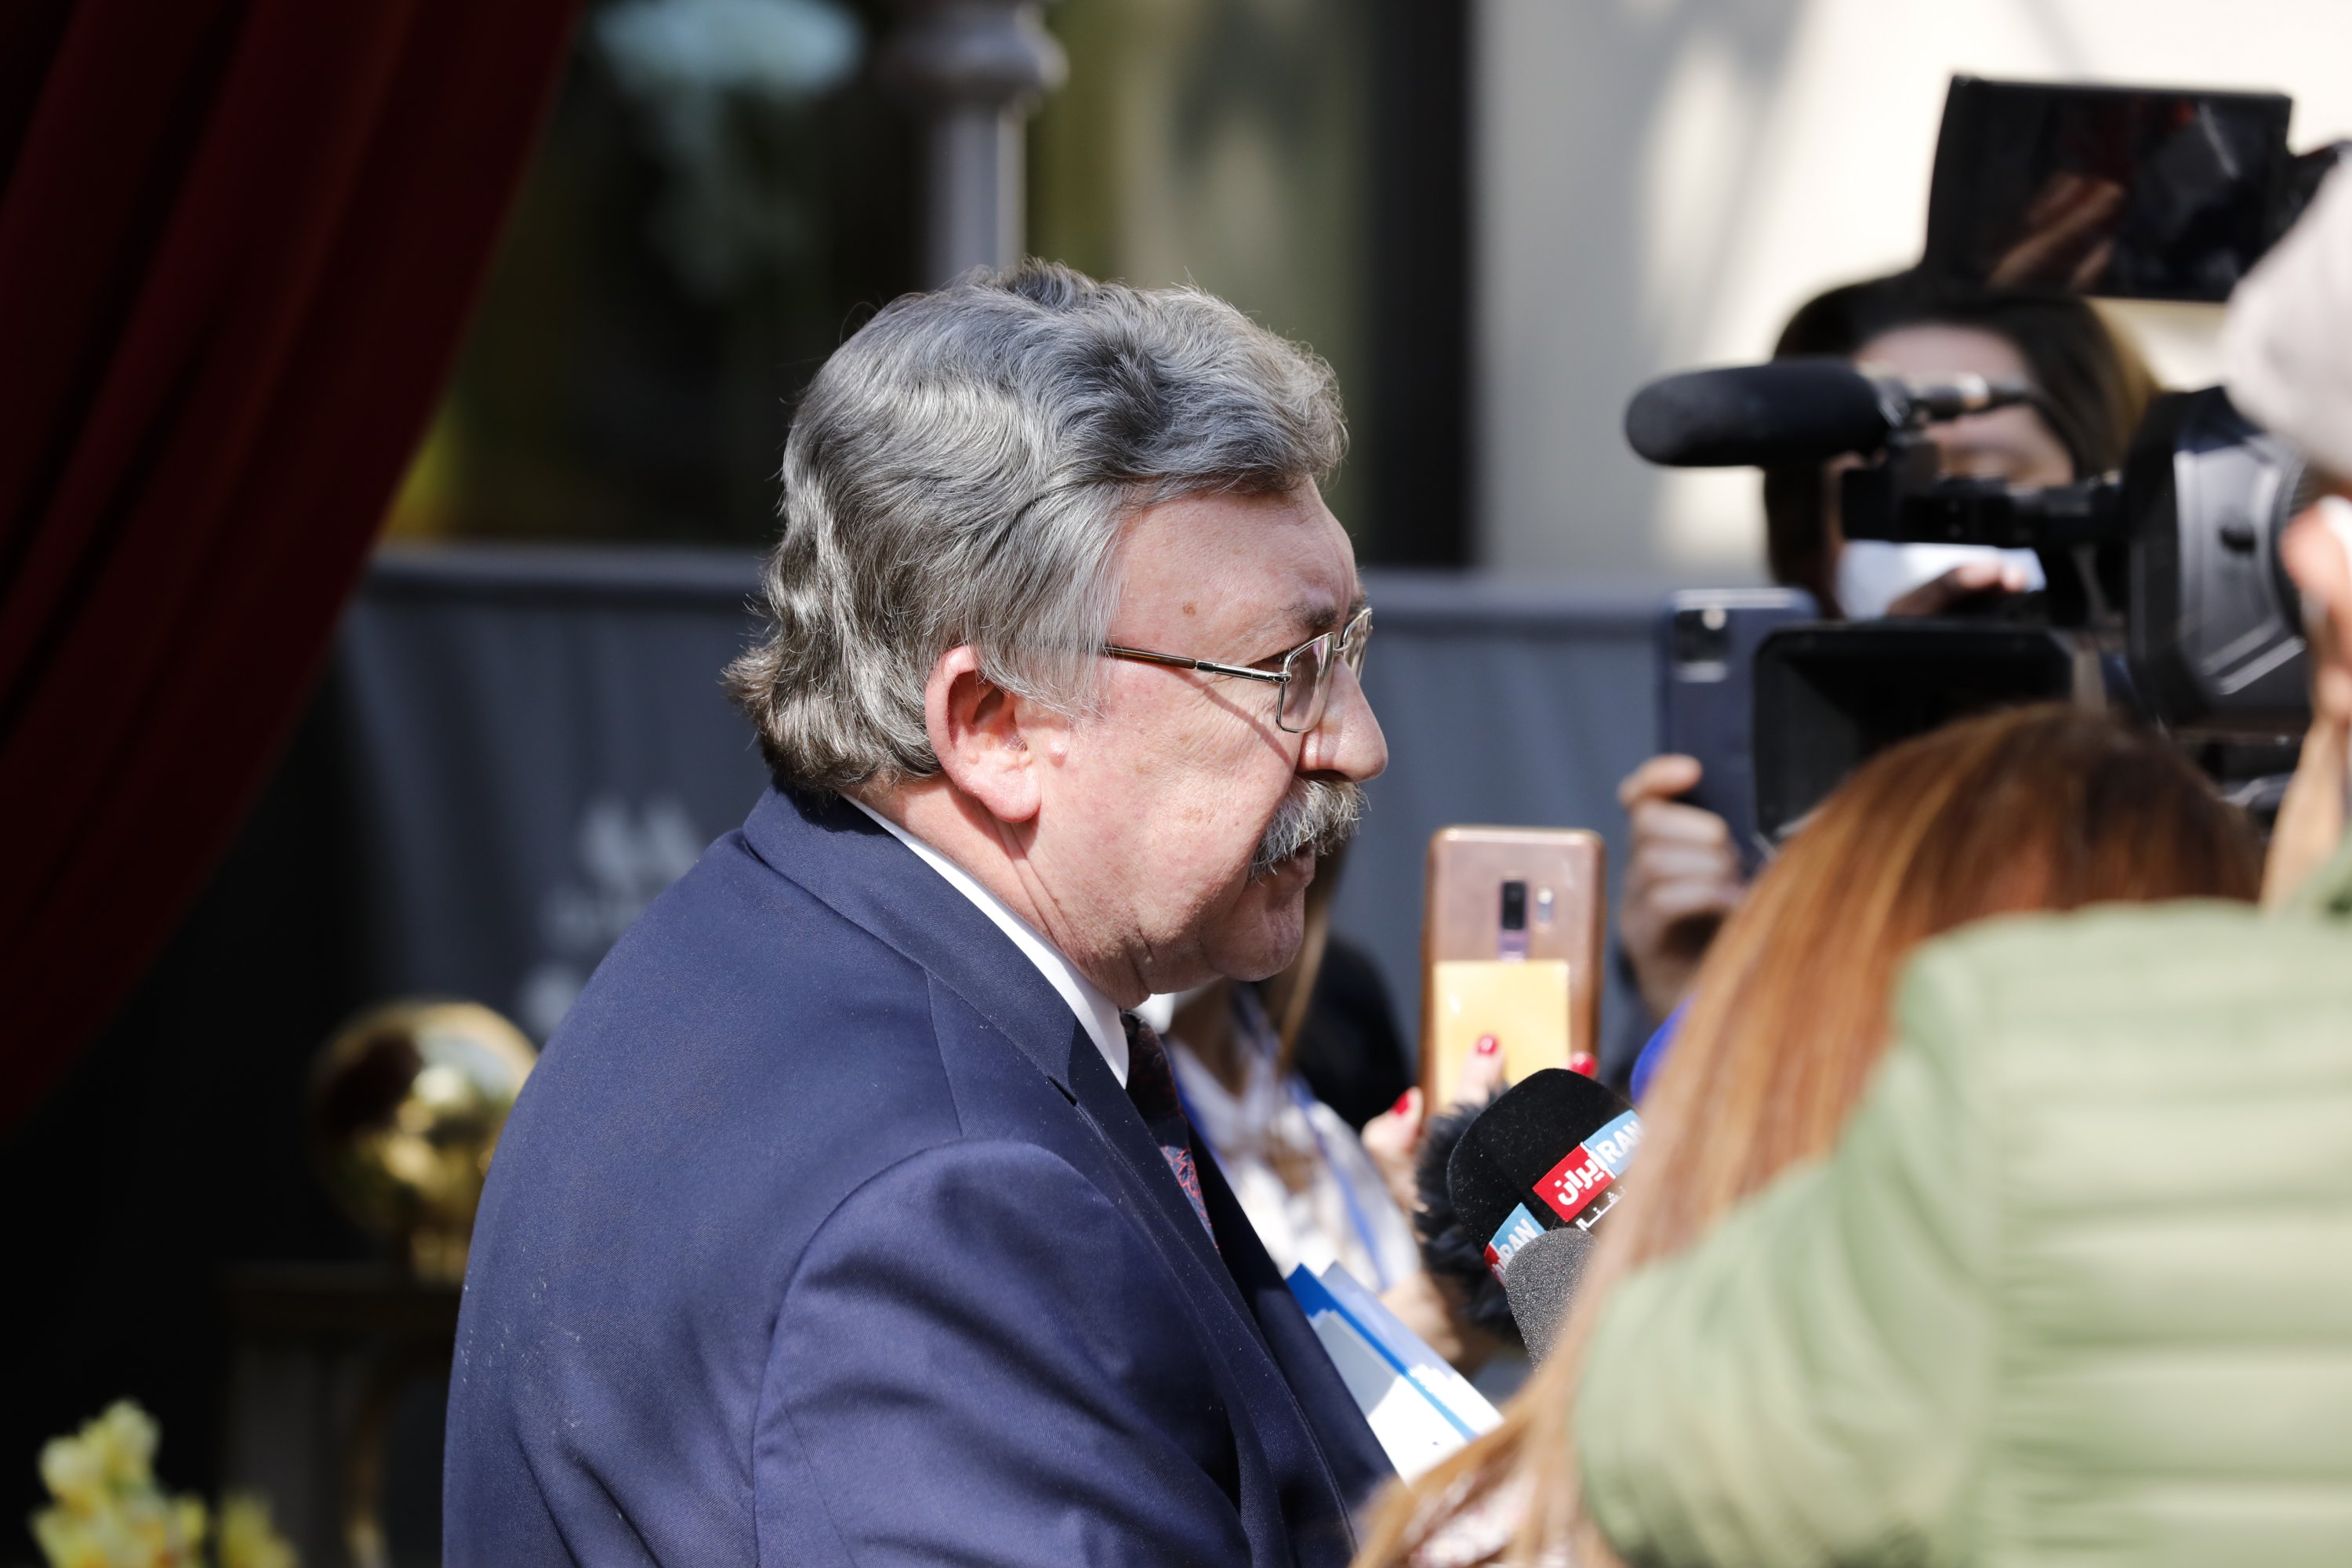 Russia's Governor to the International Atomic Energy Agency (IAEA), Mikhail Ulyanov addresses the media as he leaves the Grand Hotel Wien where closed-door nuclear talks with Iran take place in Vienna, Austria, May 1, 2021. (AP Photo)